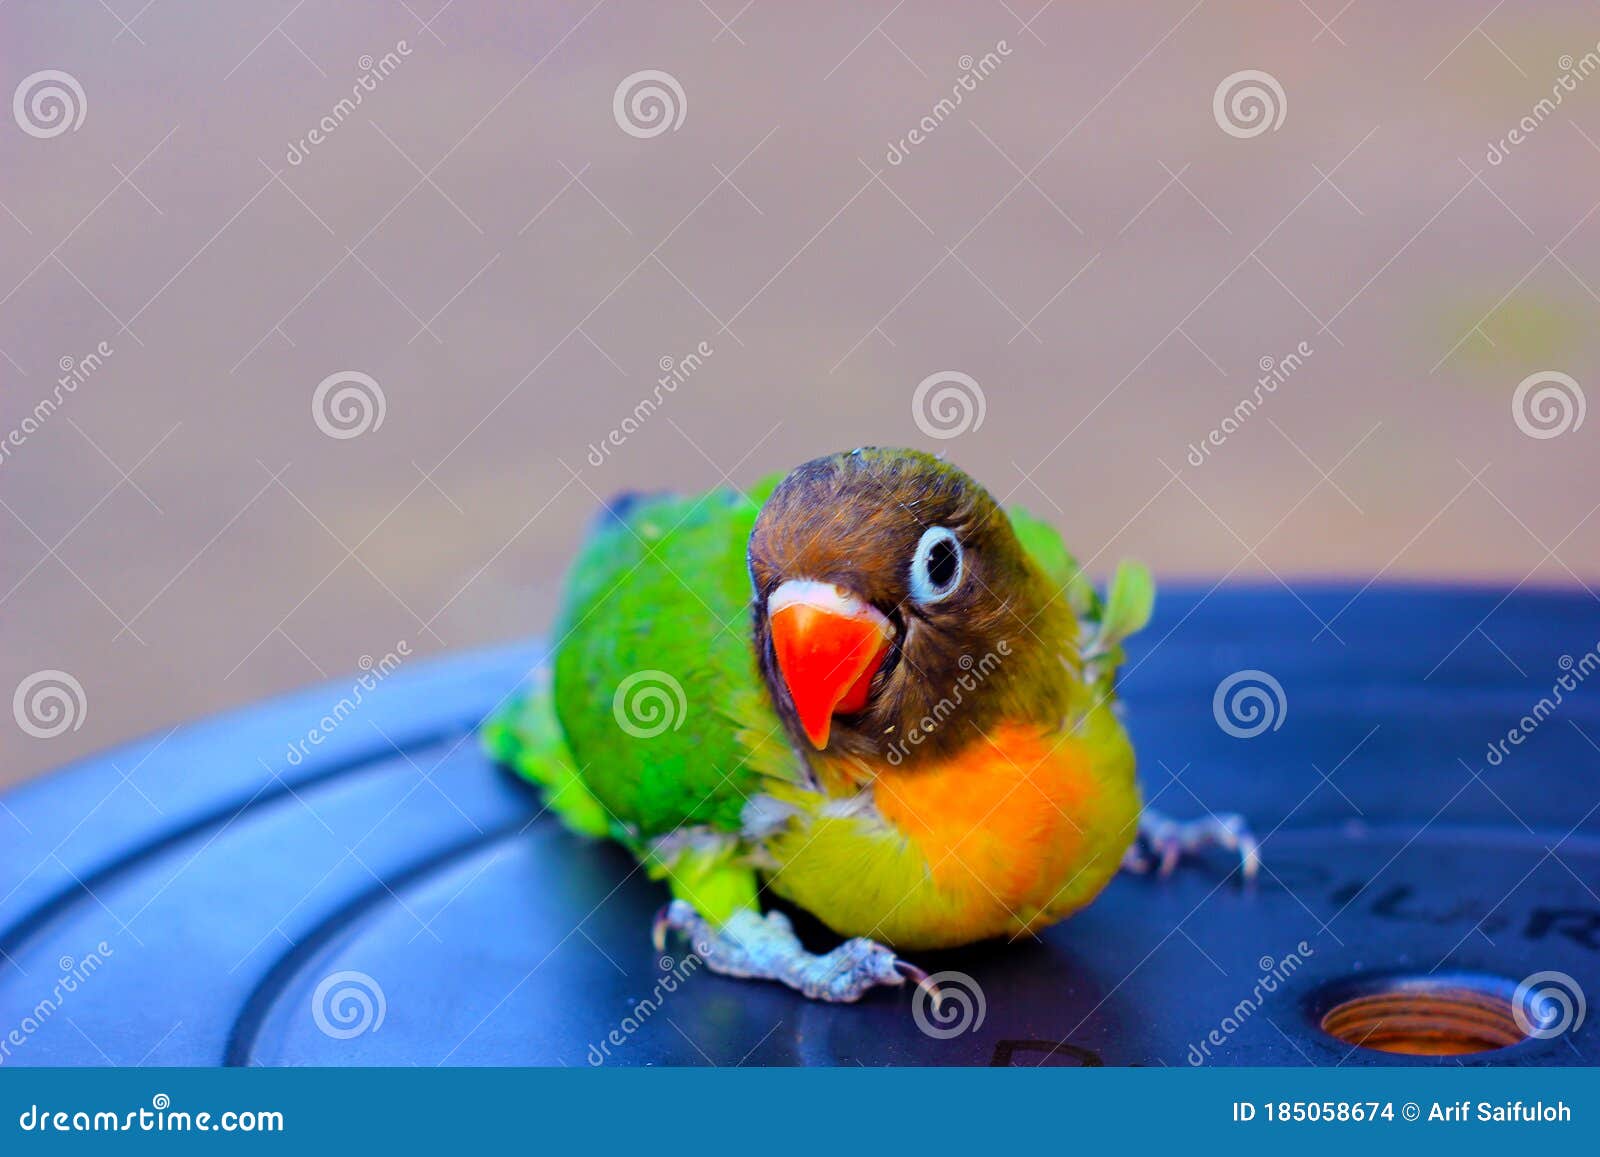 a one-month-old young love bird that has not been able to fly, is breed by small breeders, the baby birds are immediately separated from the mother after hatching, so that the mother can mate immediately